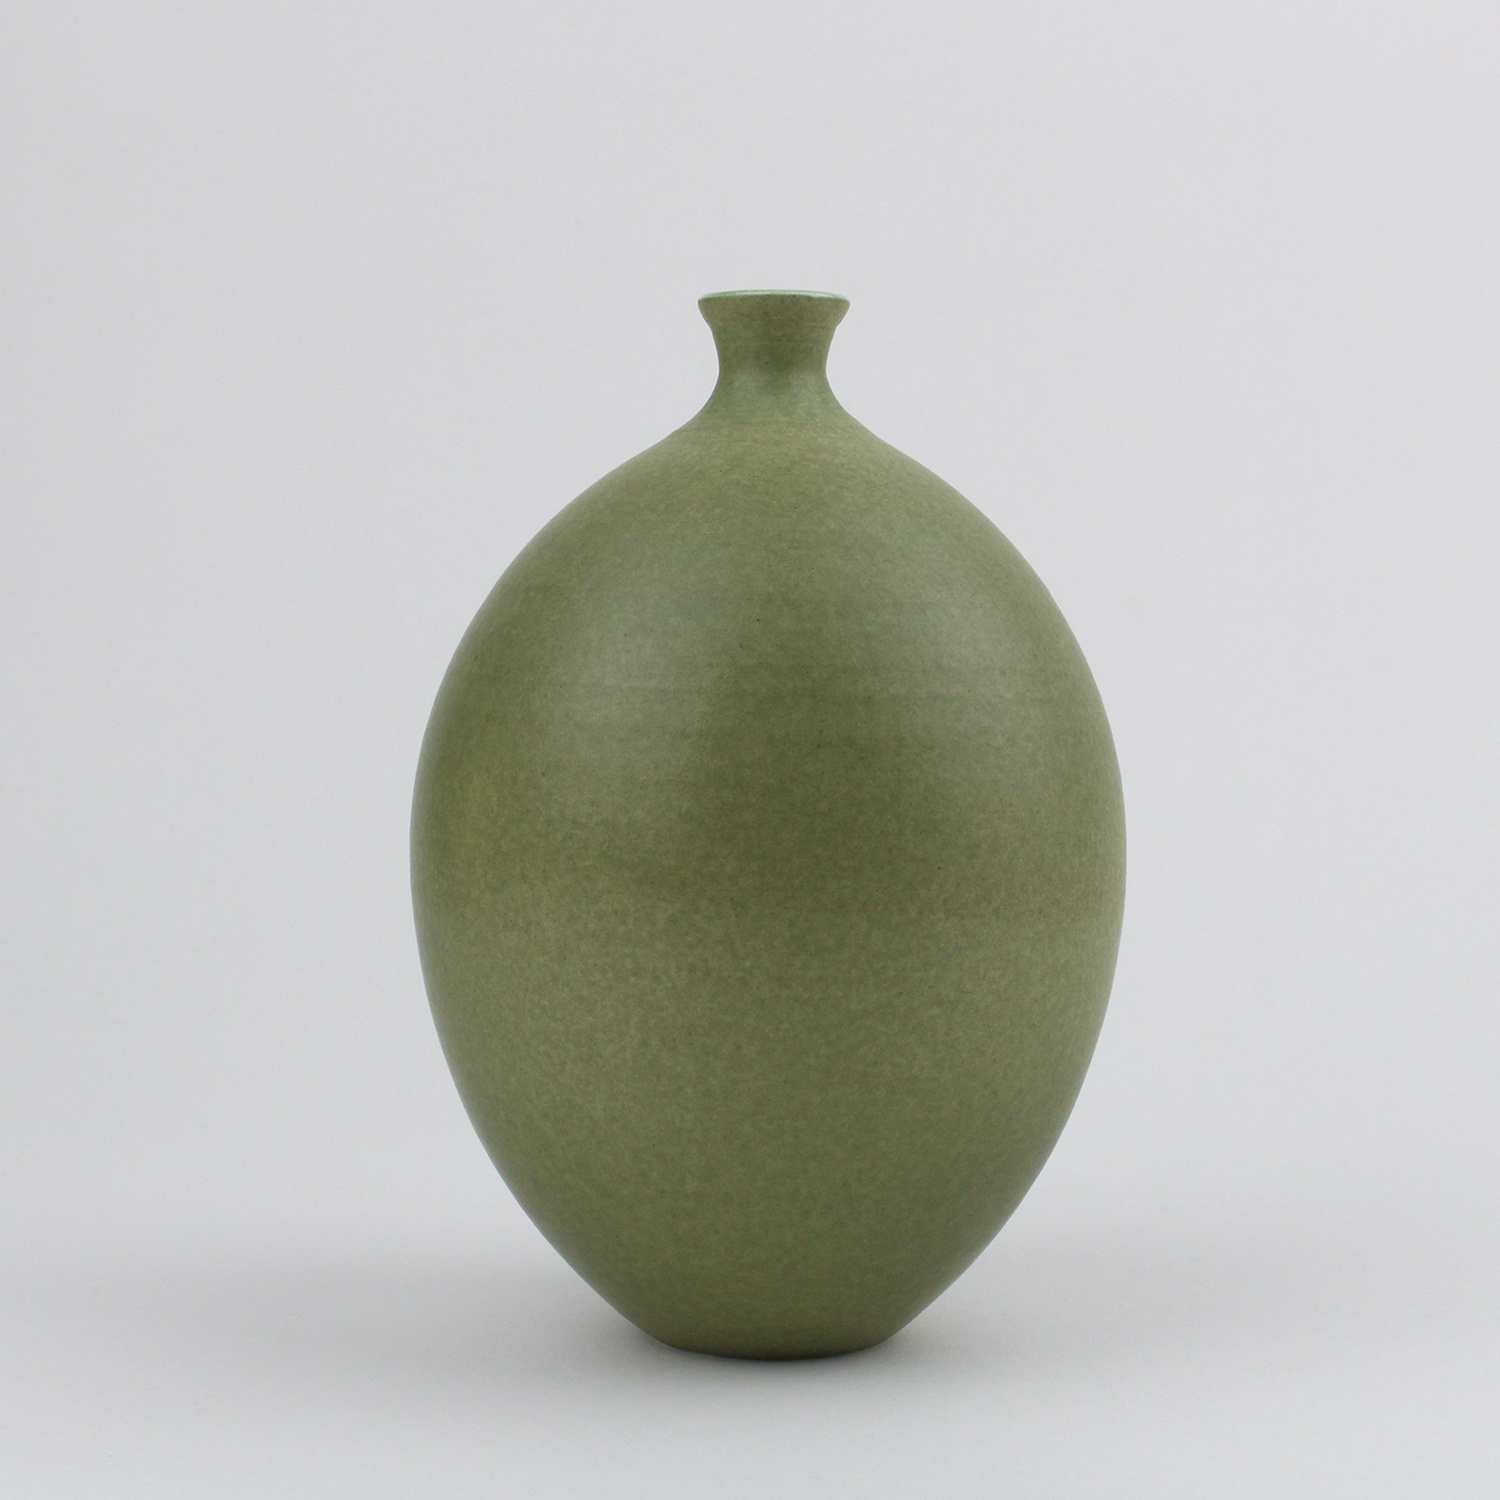 Oval Vase, ollive green by Lucy Burley